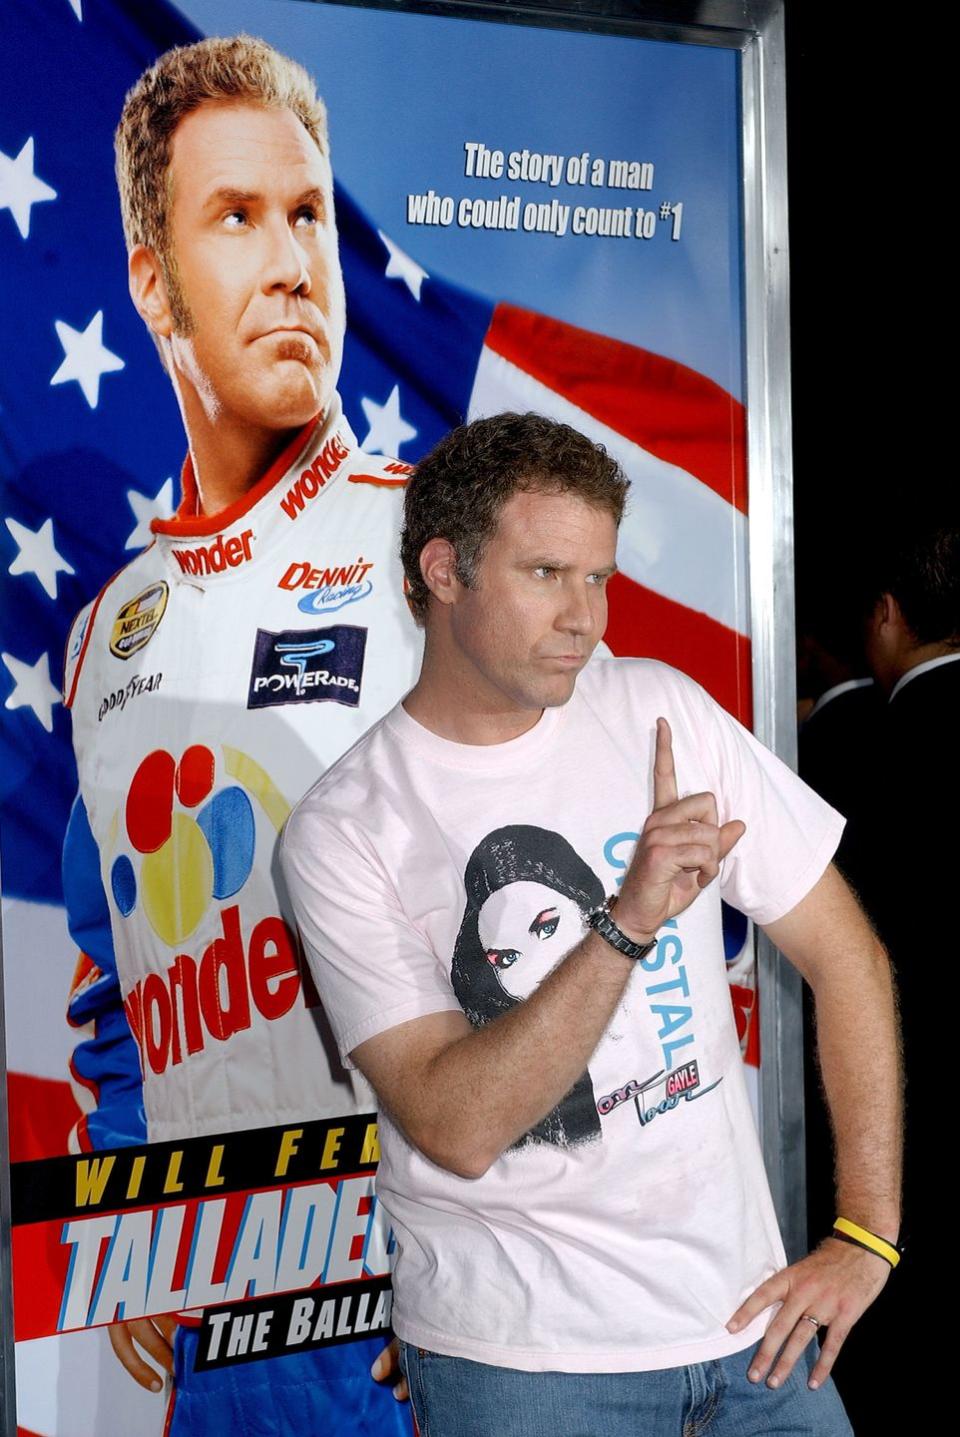 <span class="caption">Will Farrell put NASCAR on the big screen in a big way.</span><span class="photo-credit">Gregg DeGuire - Getty Images</span>